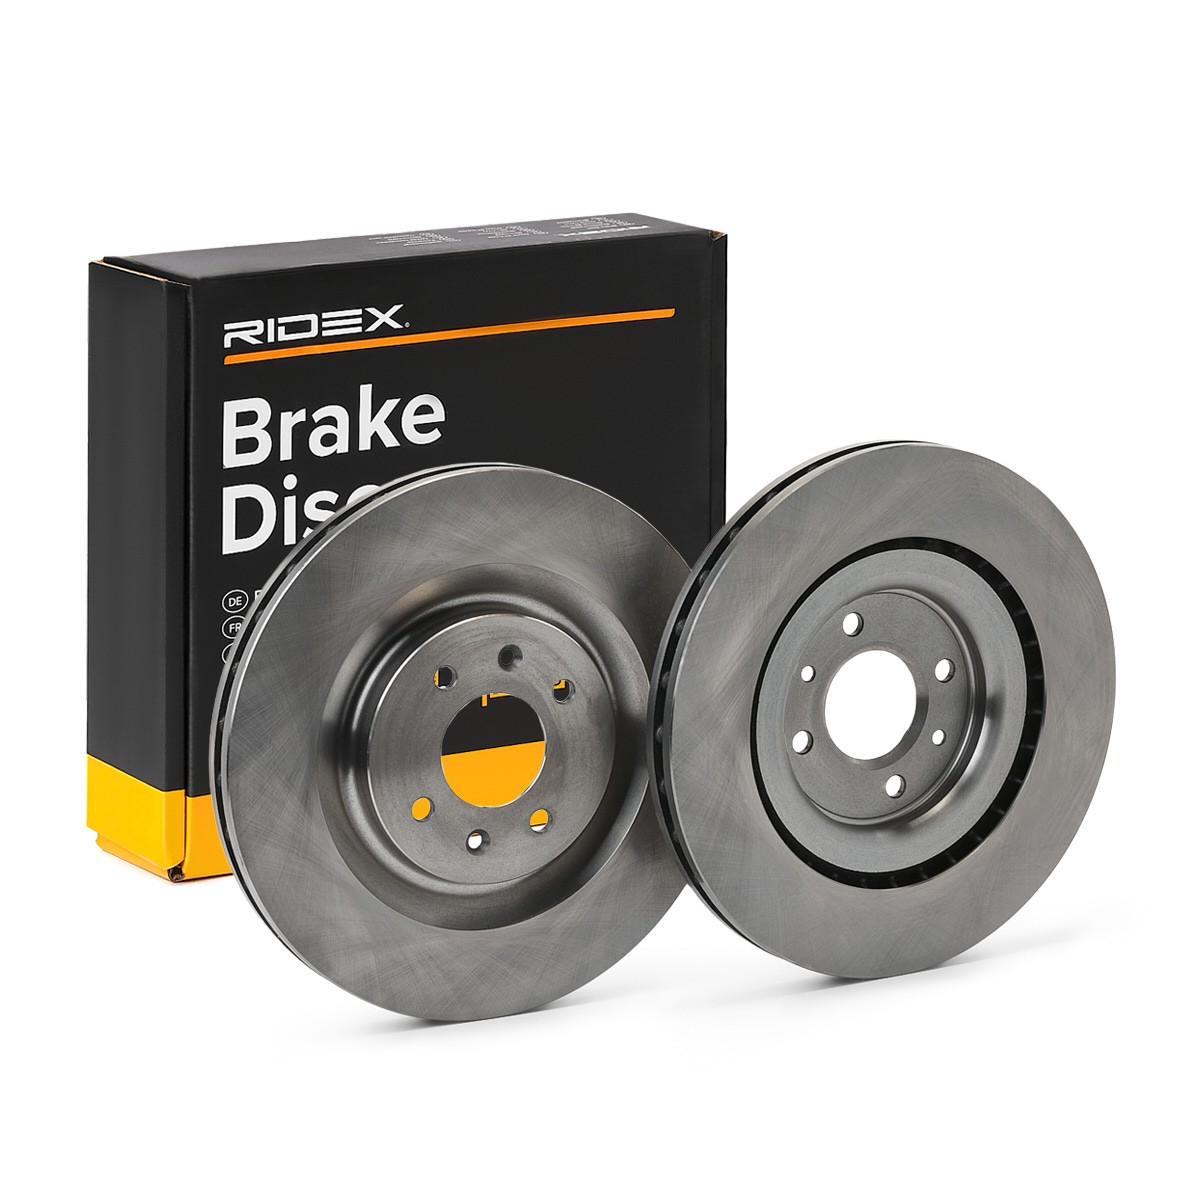 RIDEX 82B1684 Brake disc Front Axle, 323, 4/6, internally vented, Alloyed/High-carbon